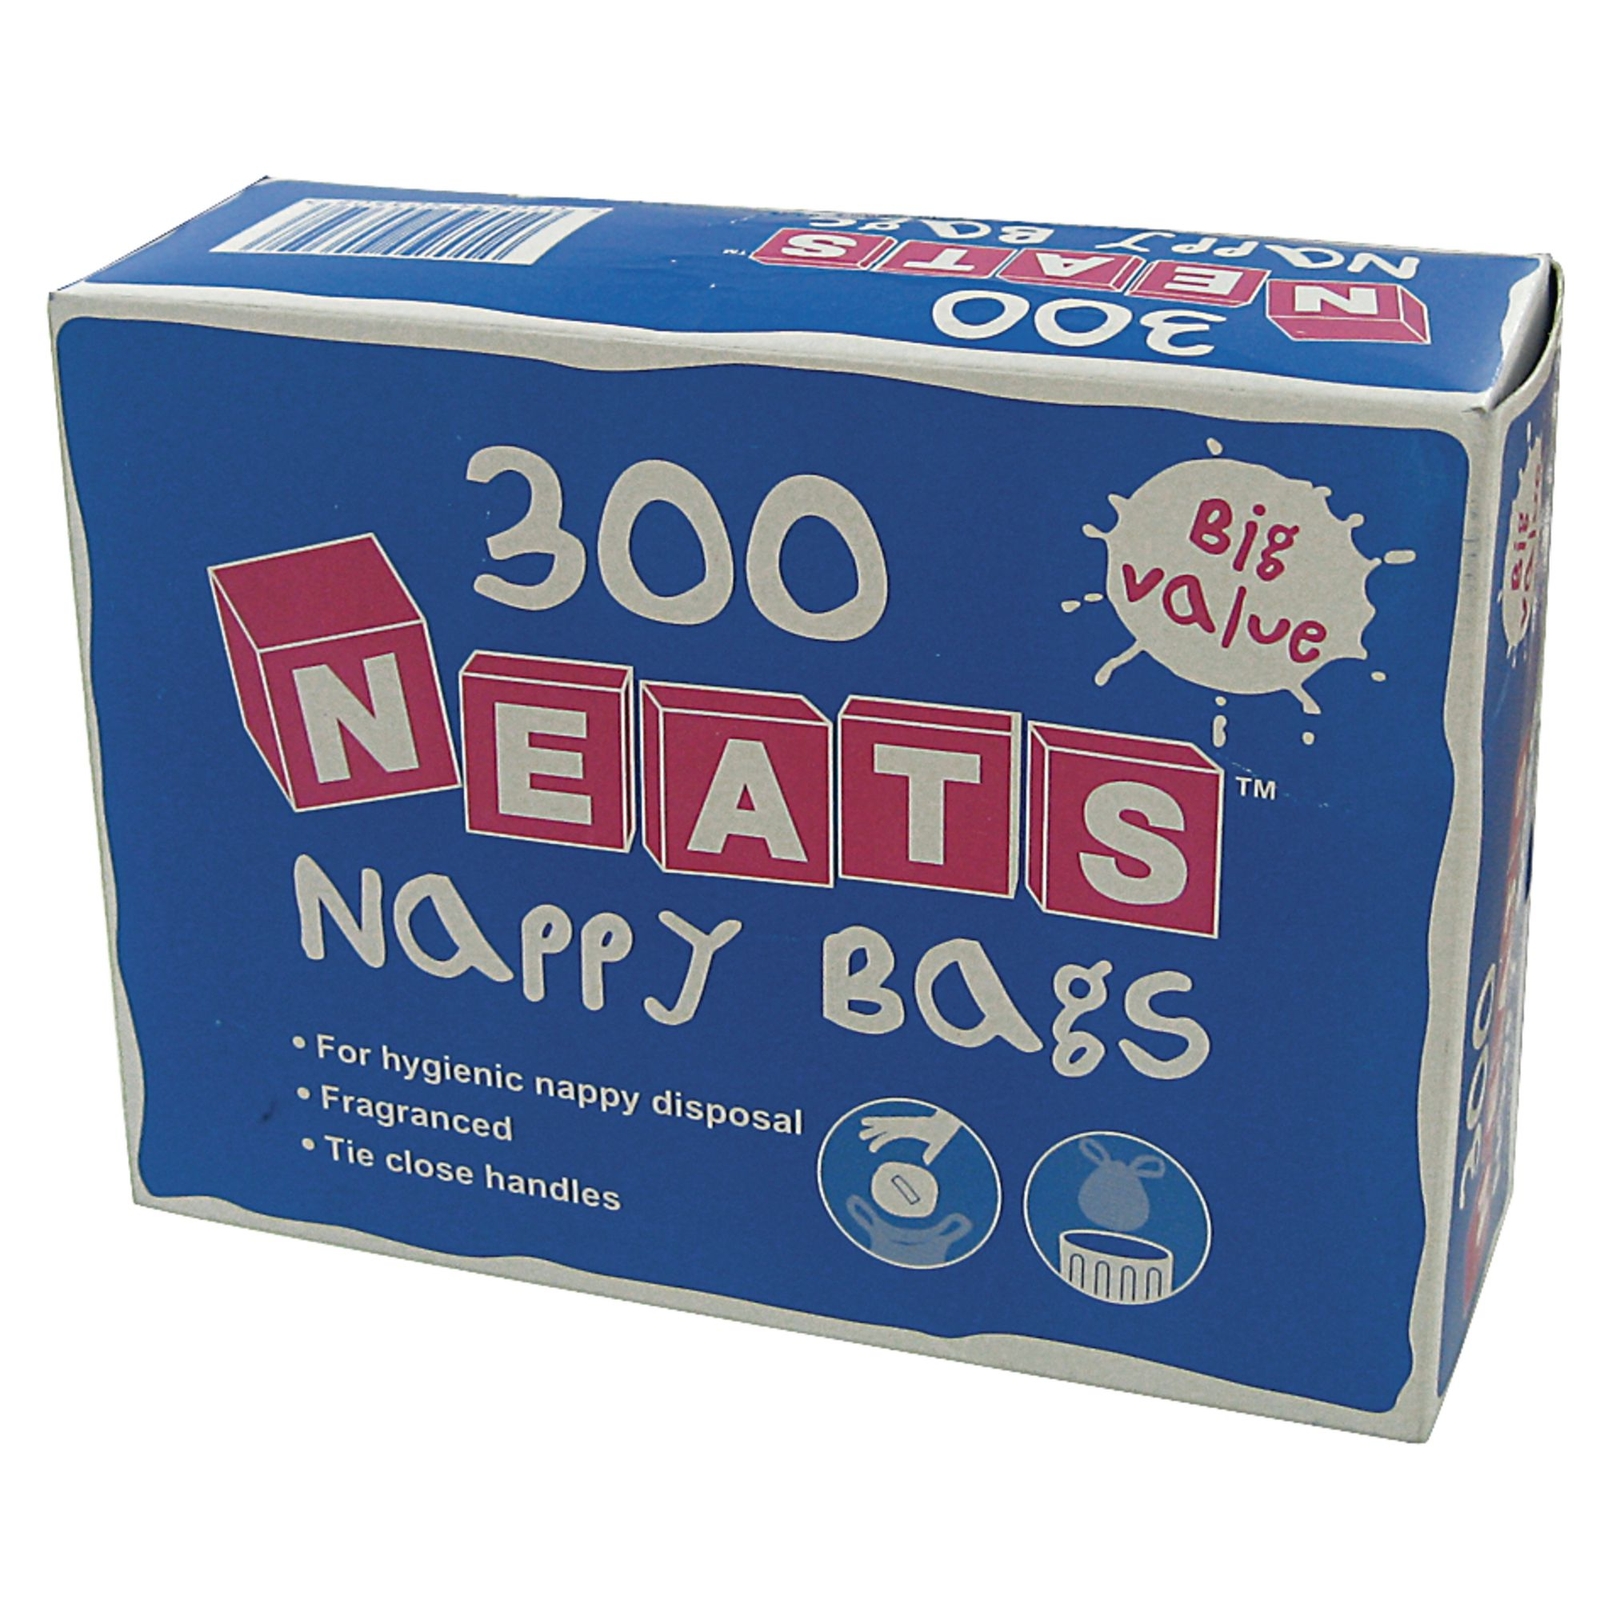 Nappy Bags - Pack of 300